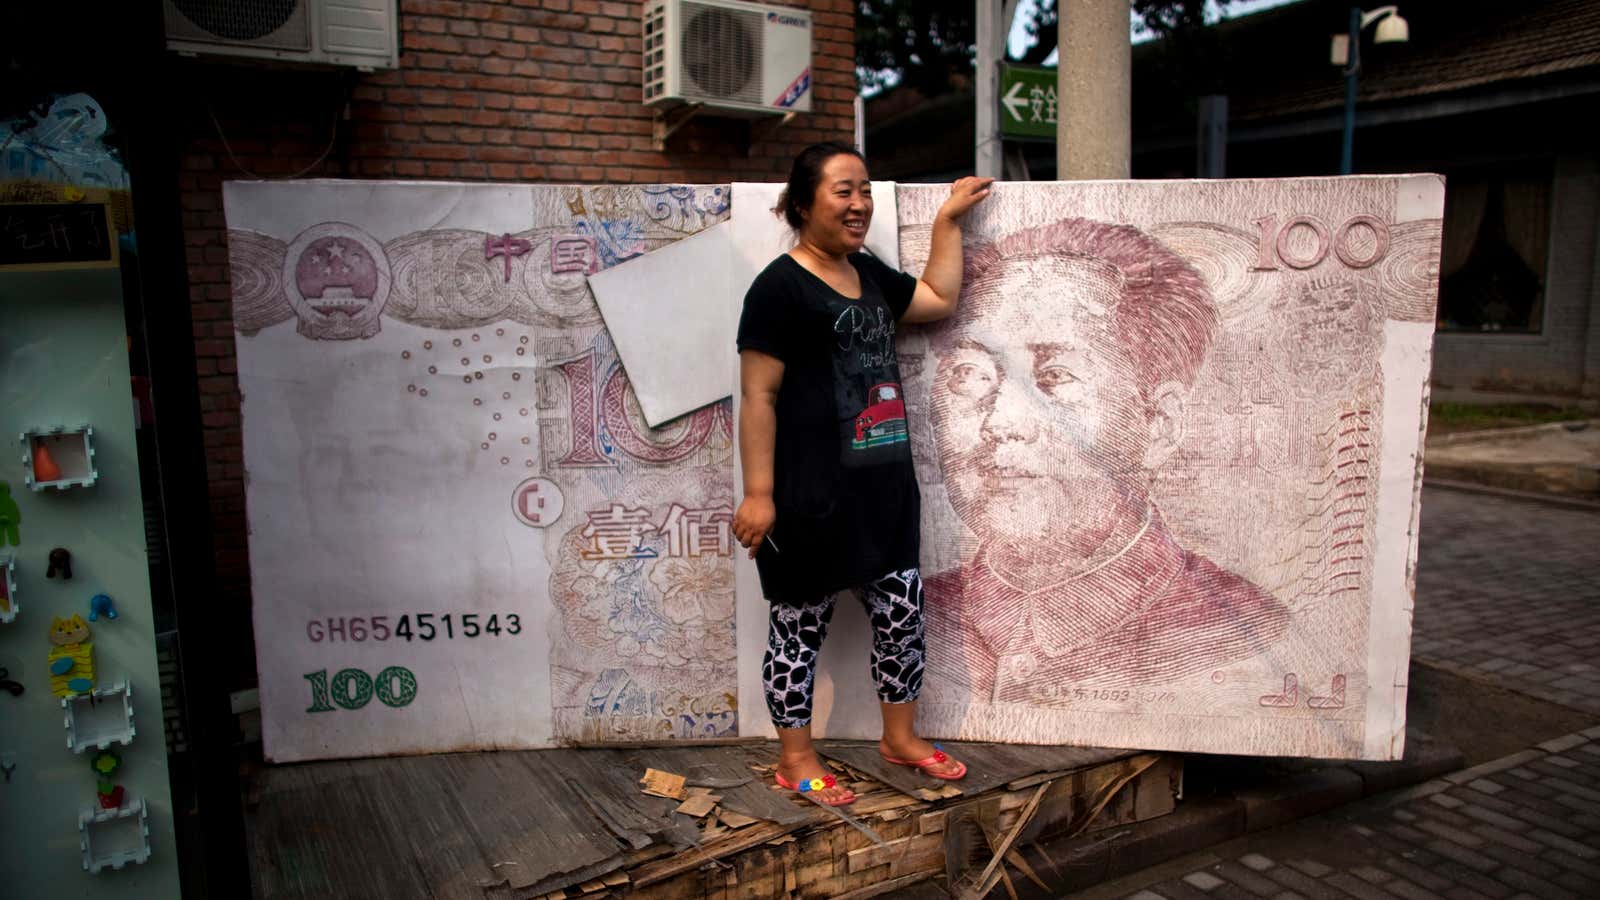 A woman poses for photos with an art installation showing a stack of renminbi banknotes in Beijing, China.